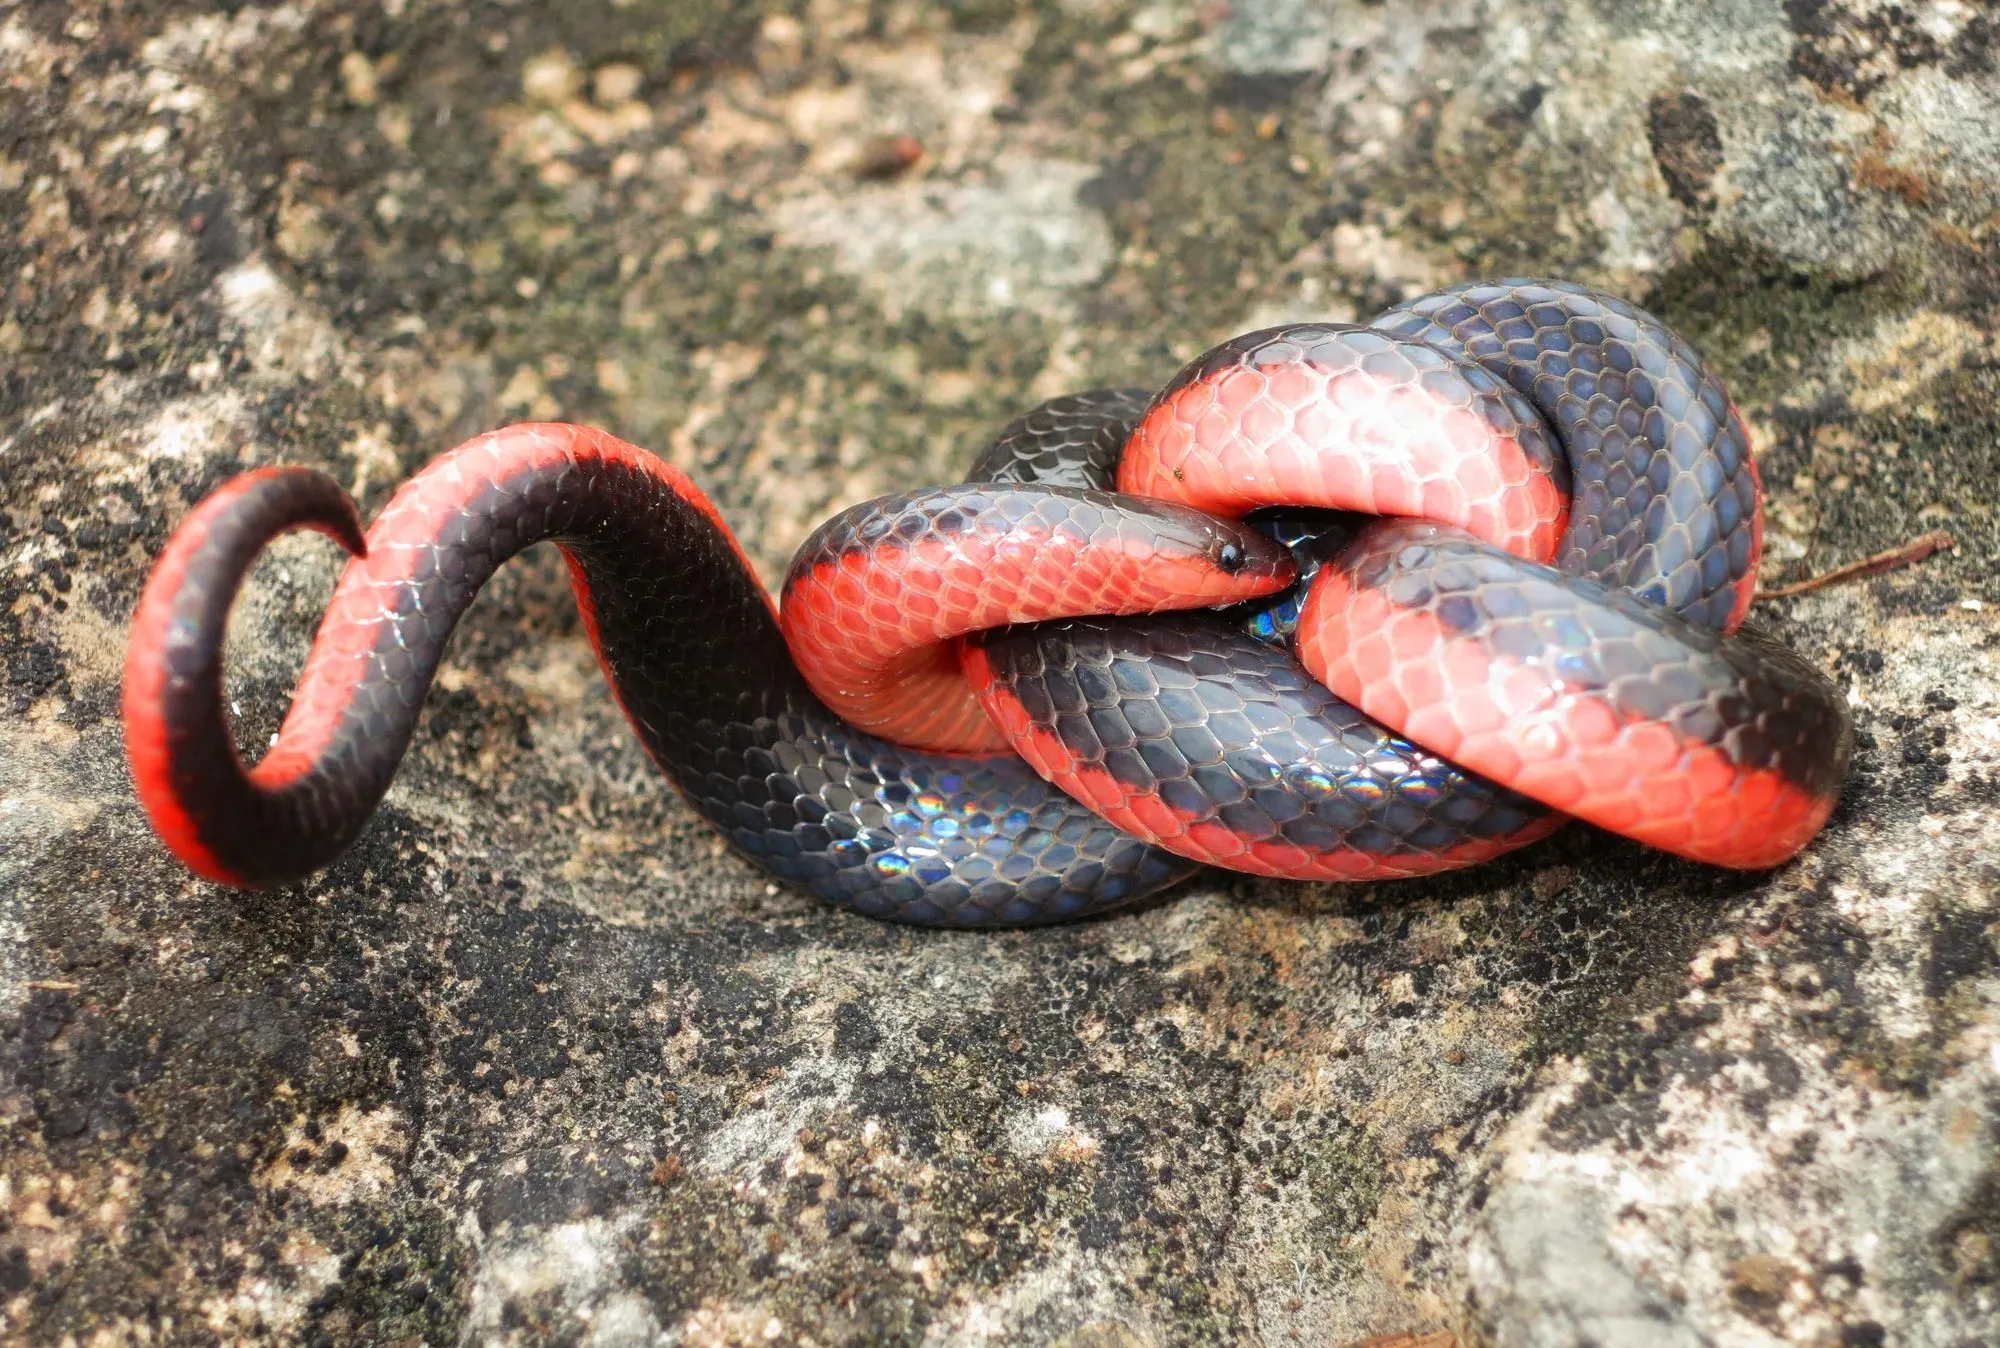 Western worm snake pictures are adorable.